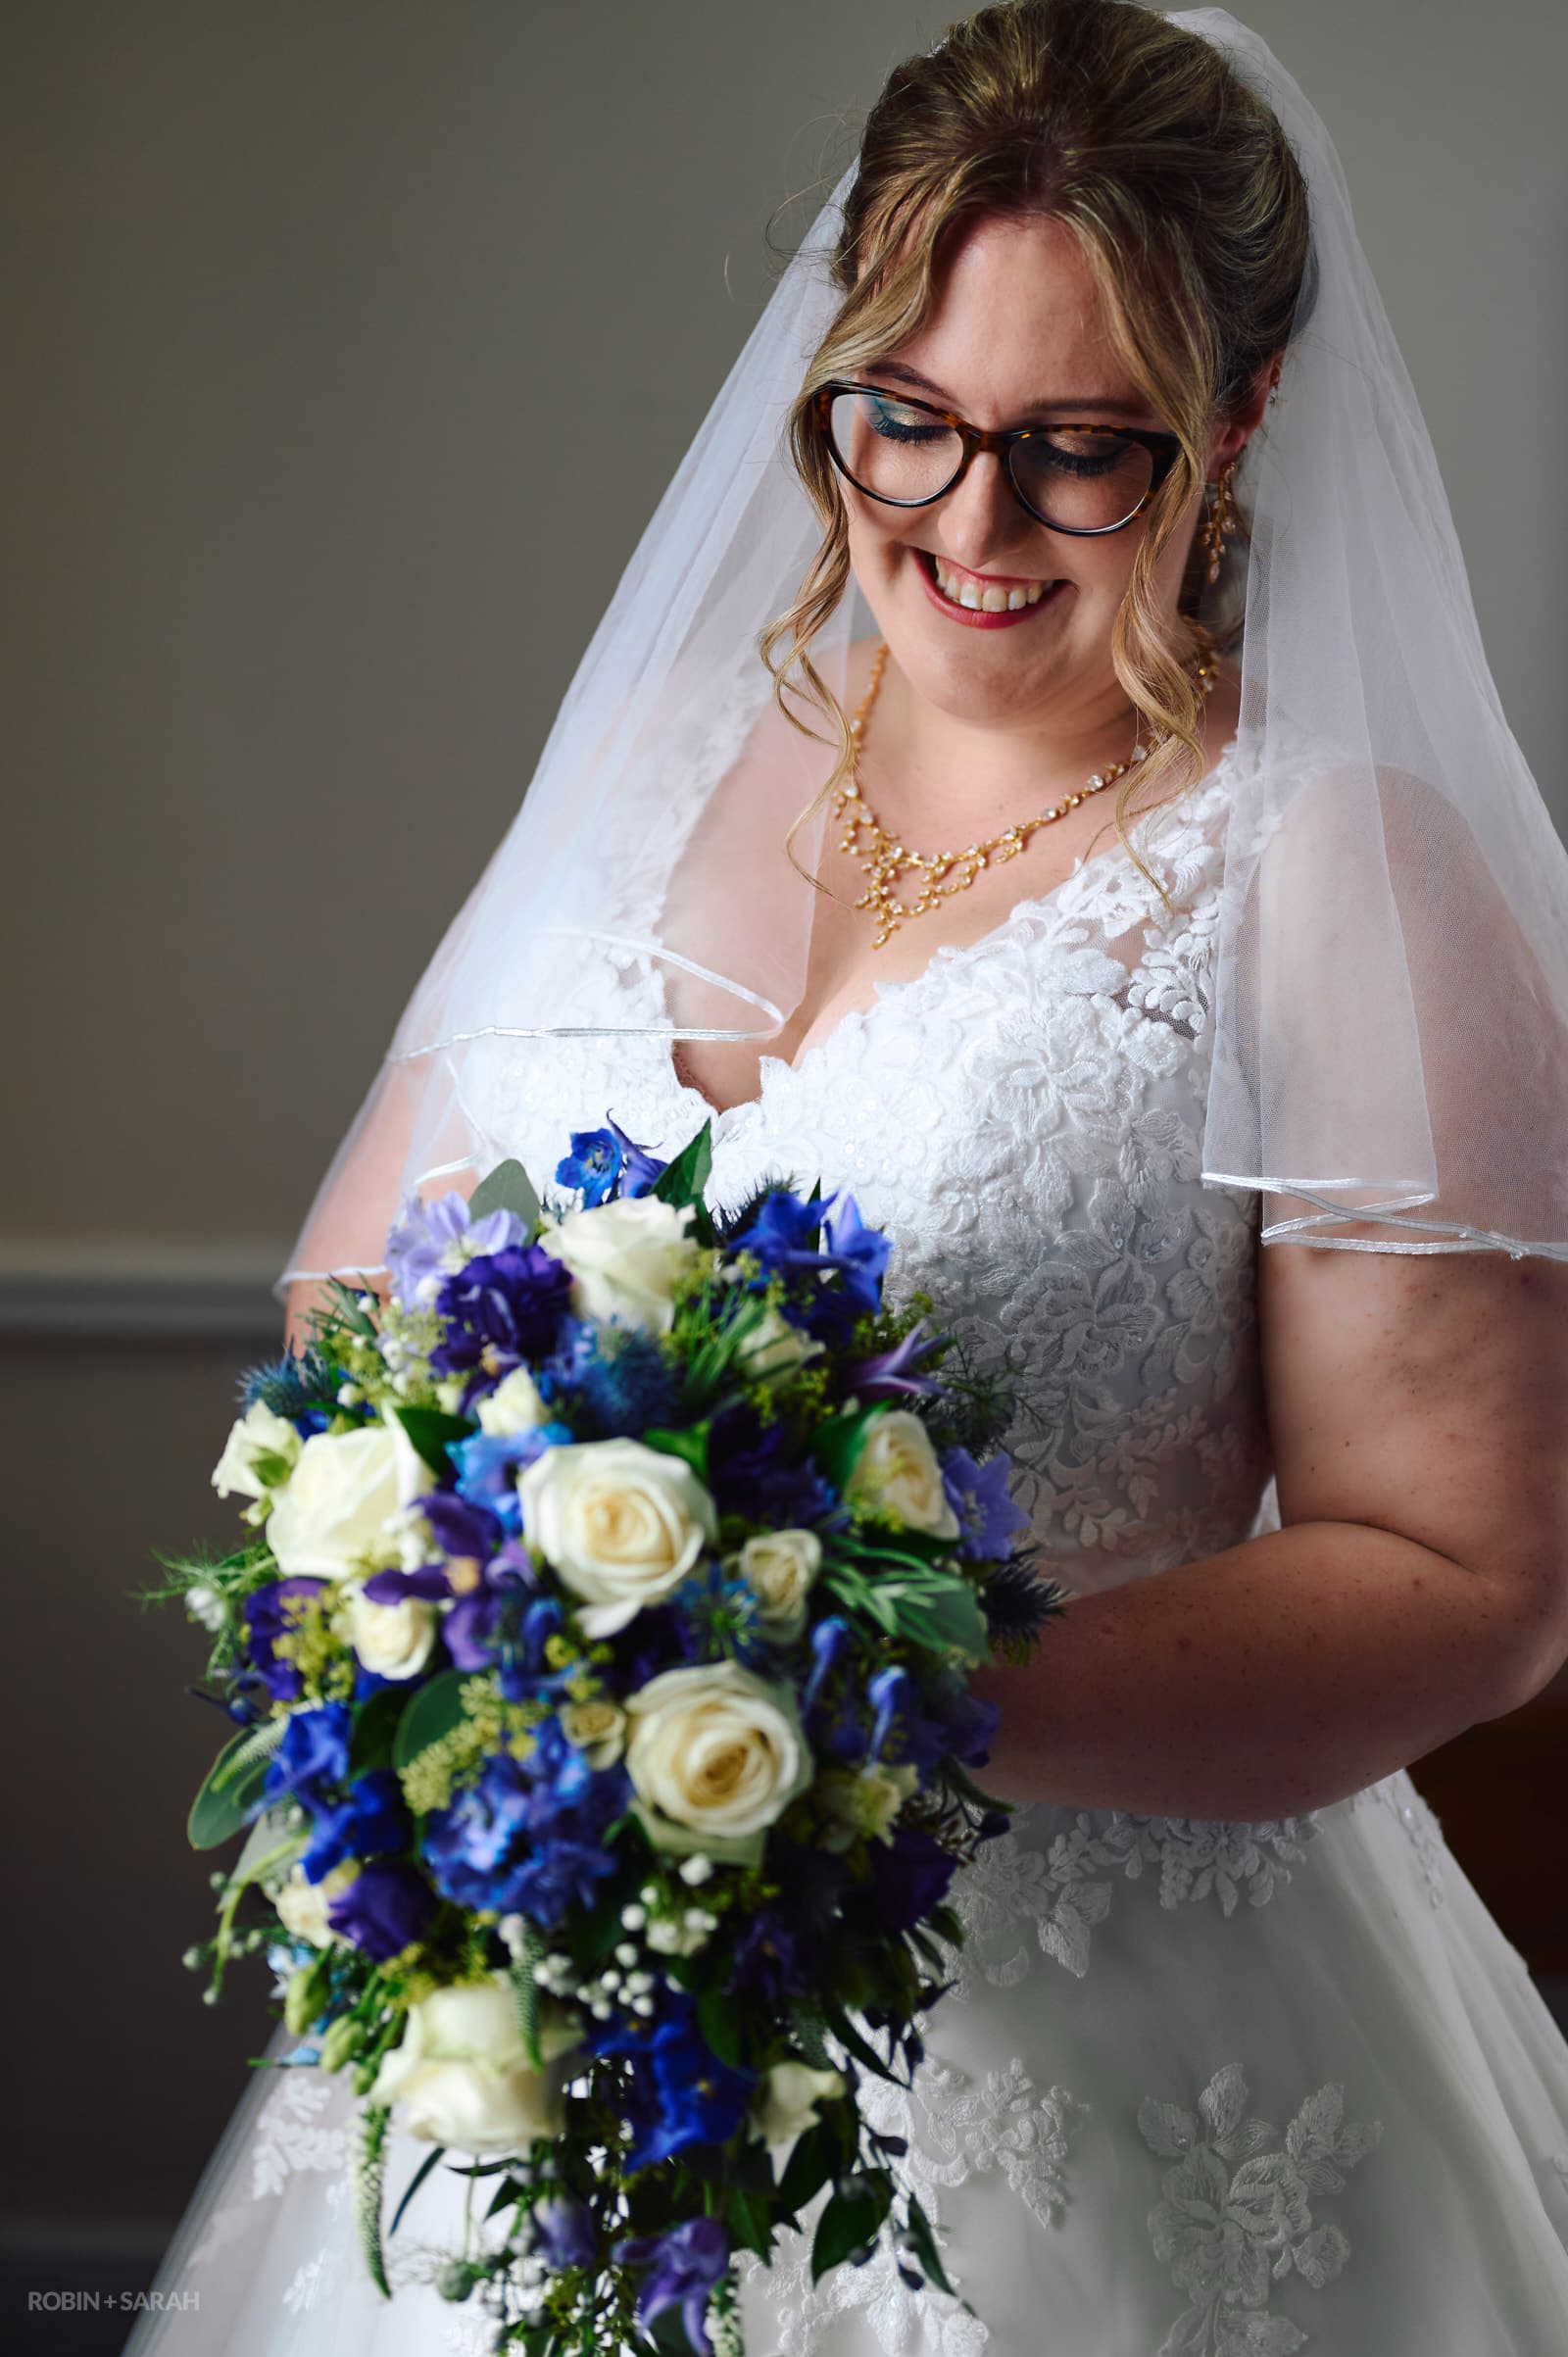 Portrait of bride with beautiful bouquet of flowers